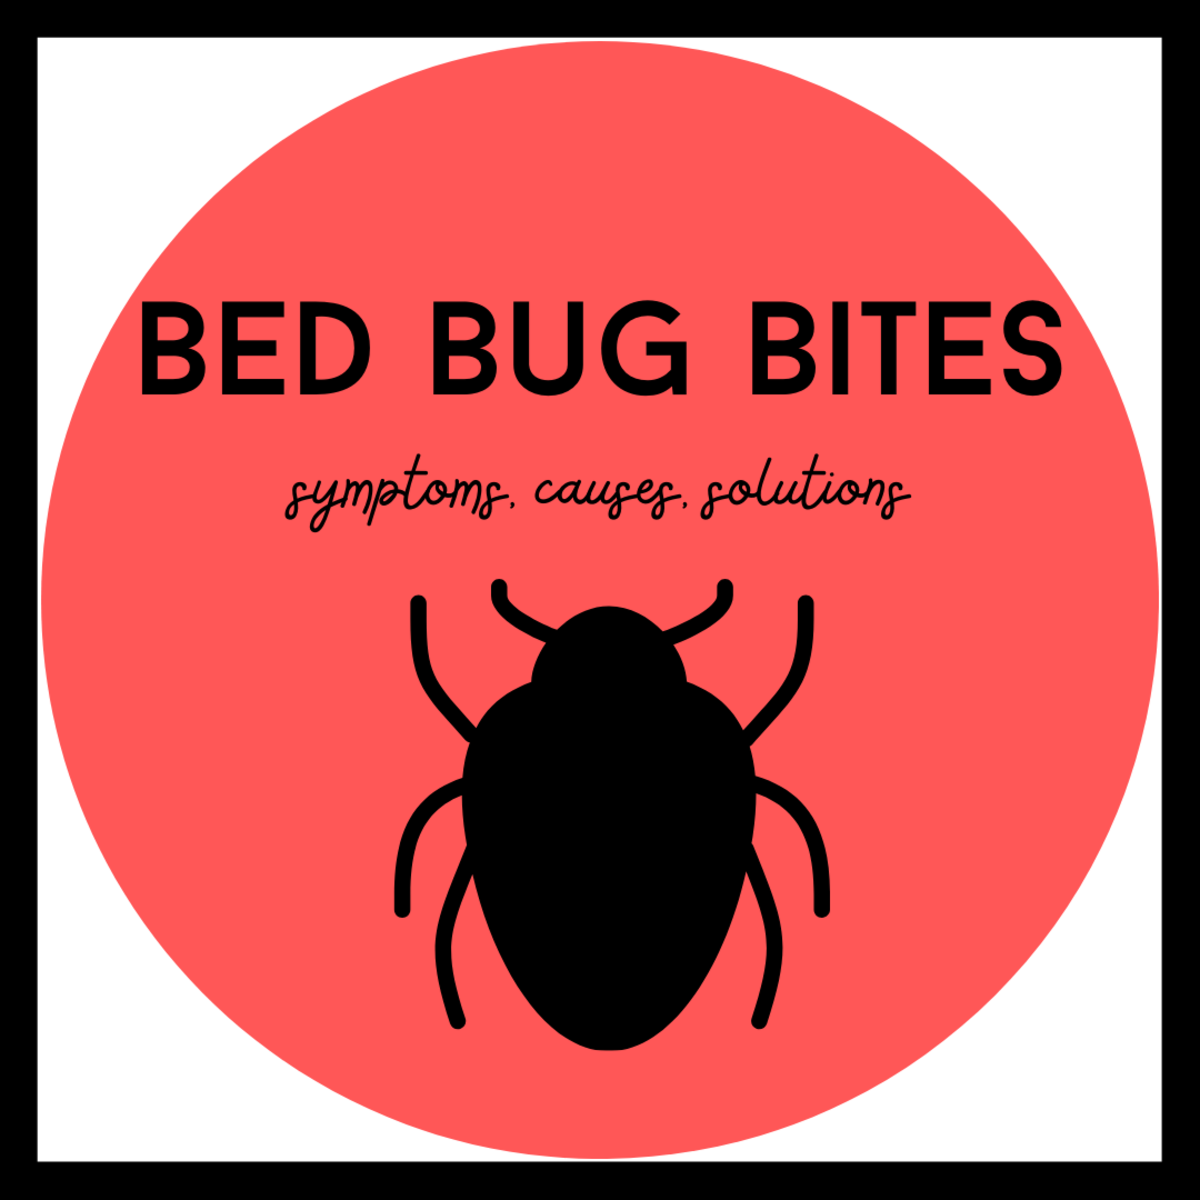 Bed Bug Bites: Pictures, Symptoms, Causes, Treatment